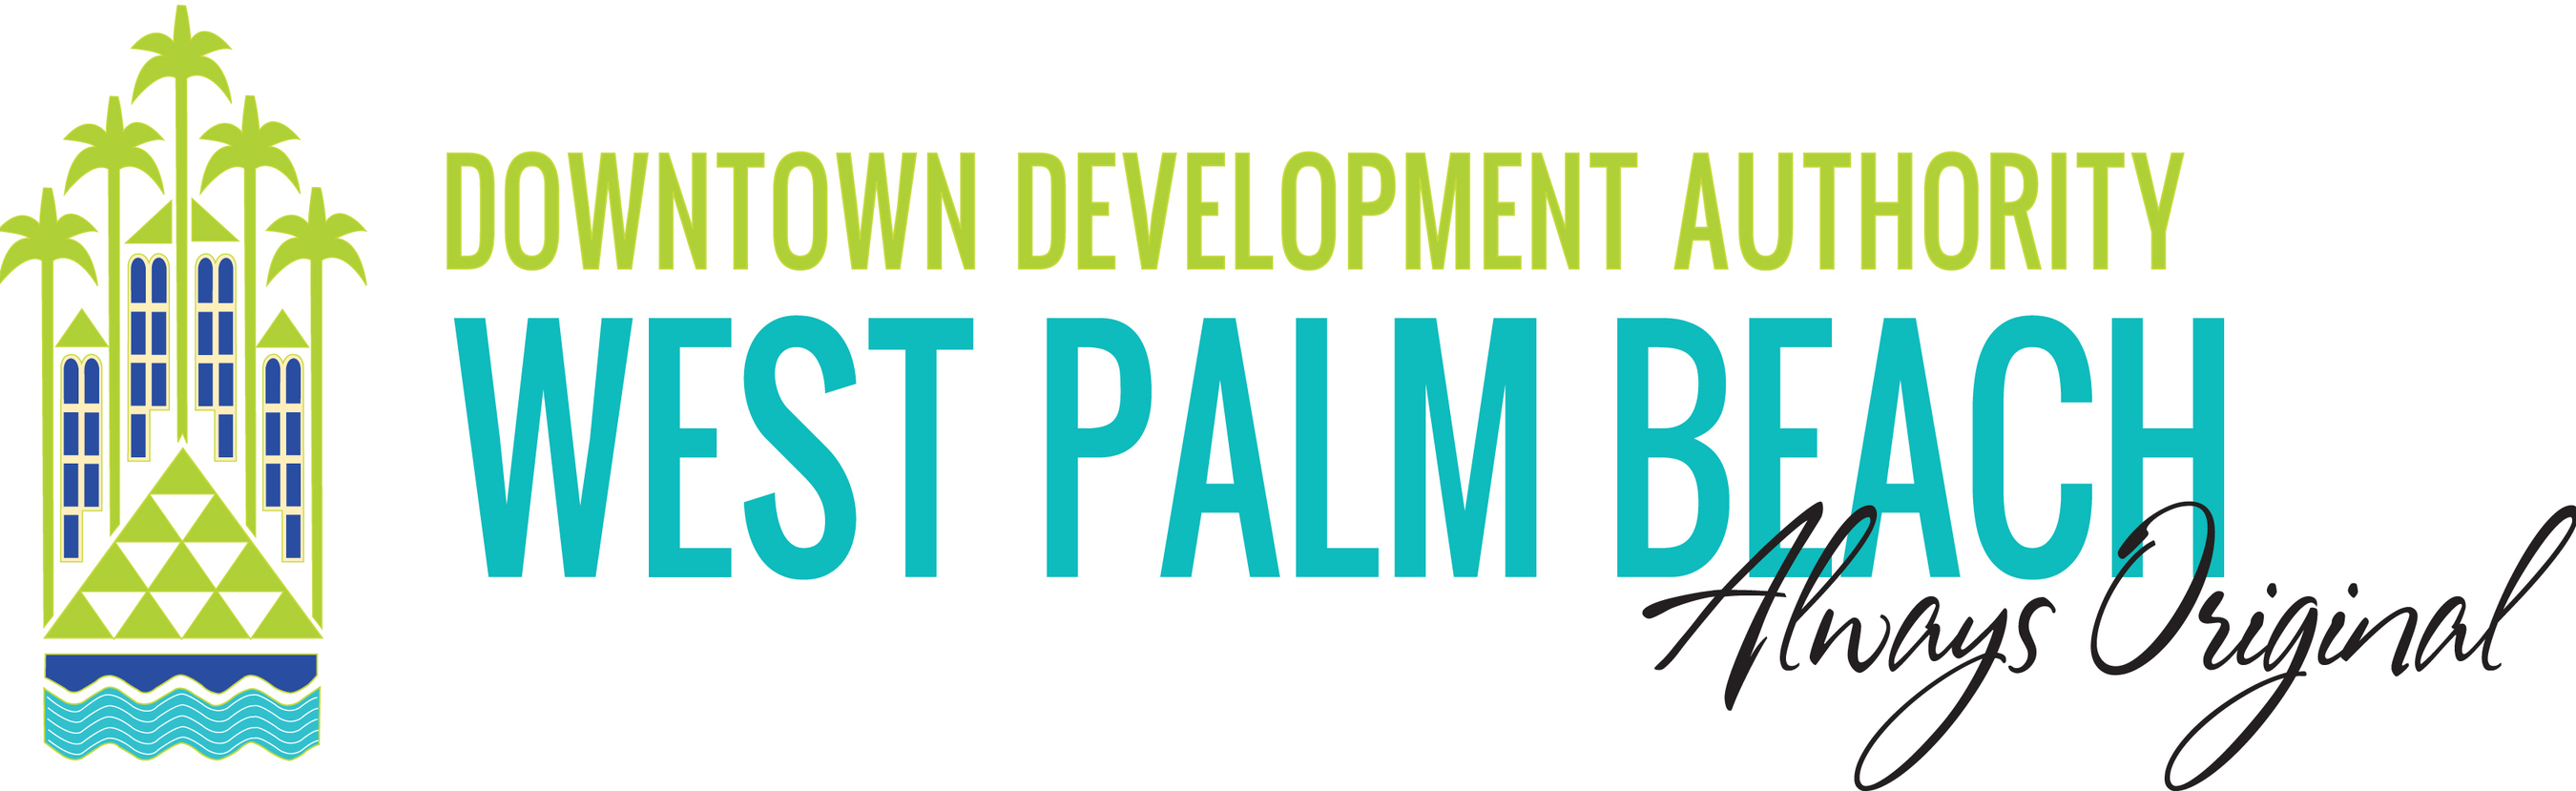 The West Palm Beach Downtown Development Authority is an independent taxing district created in 1967 by a special act of the Florida Legislature. Its mission is to promote and enhance a safe, vibrant Downtown for its residents, businesses and visitors through the strategic development of economic, social and cultural opportunities.